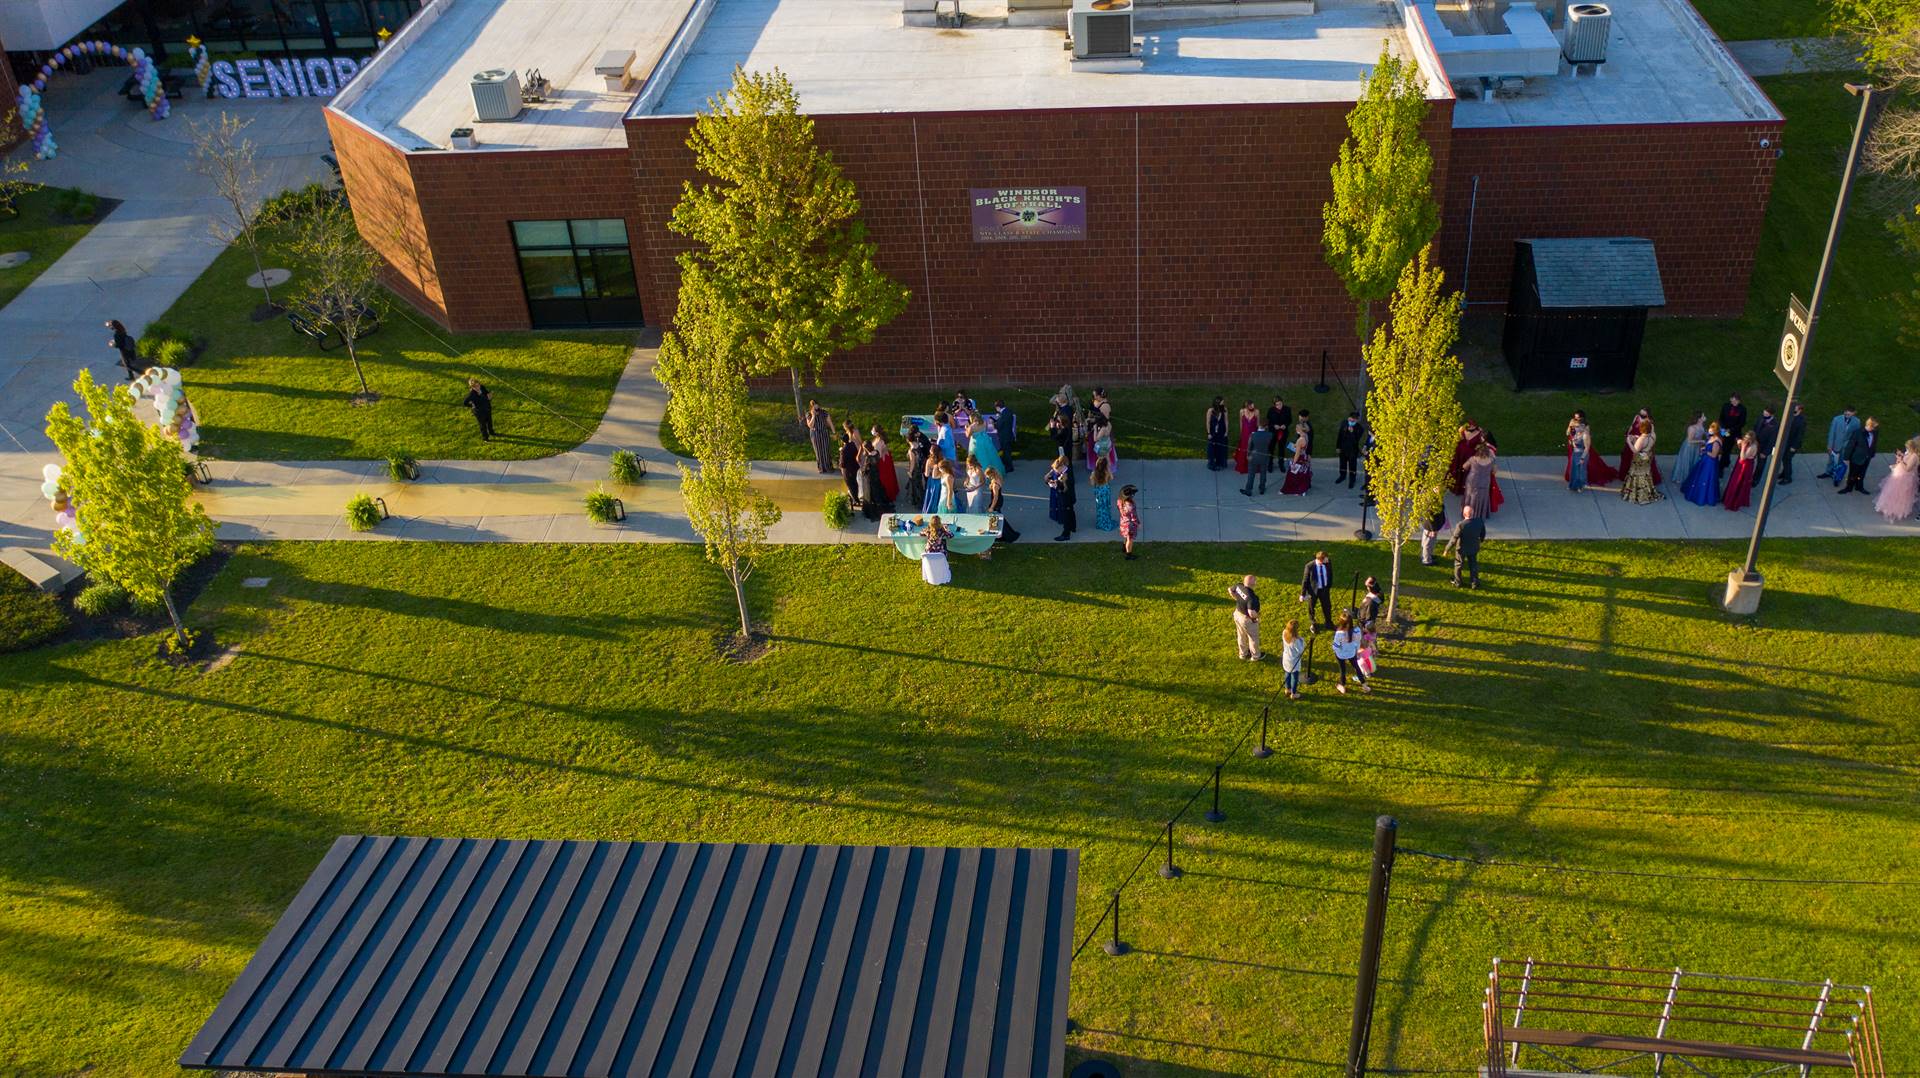 Arial view of high school with students walking